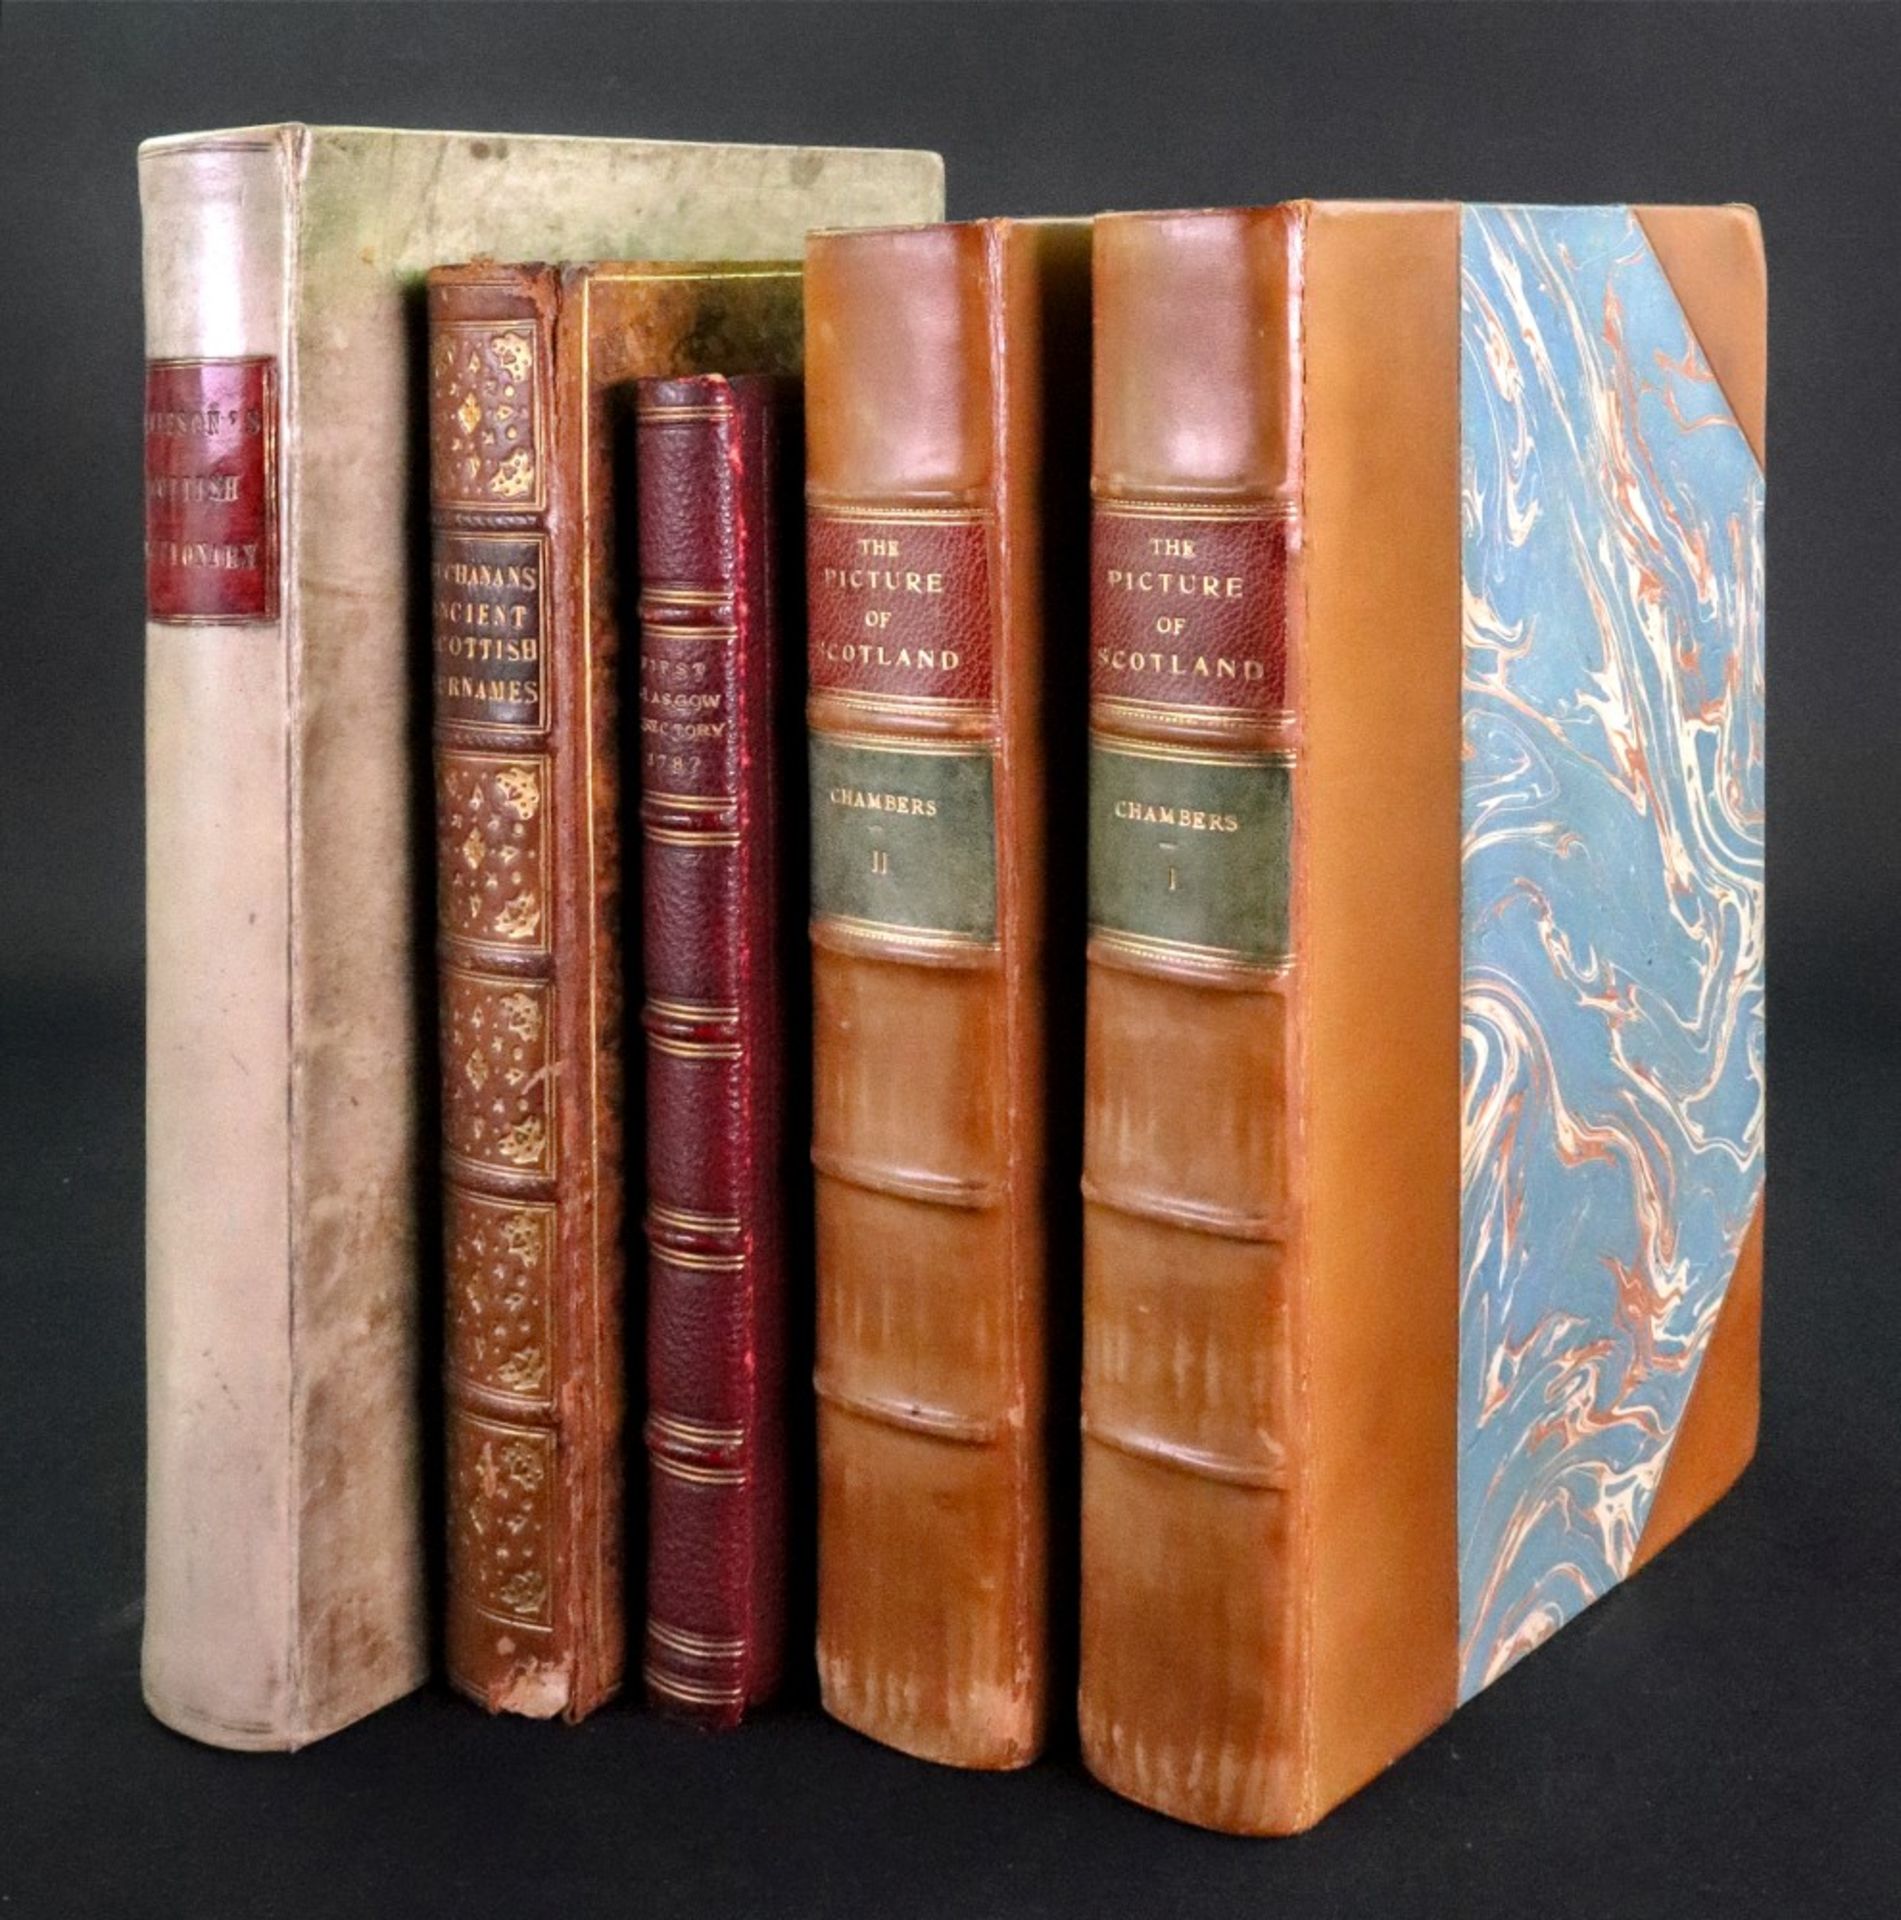 CHAMBERS (Robert) The Picture of Scotland, 2 volumes, 2nd edition 1828, half gilt calf,